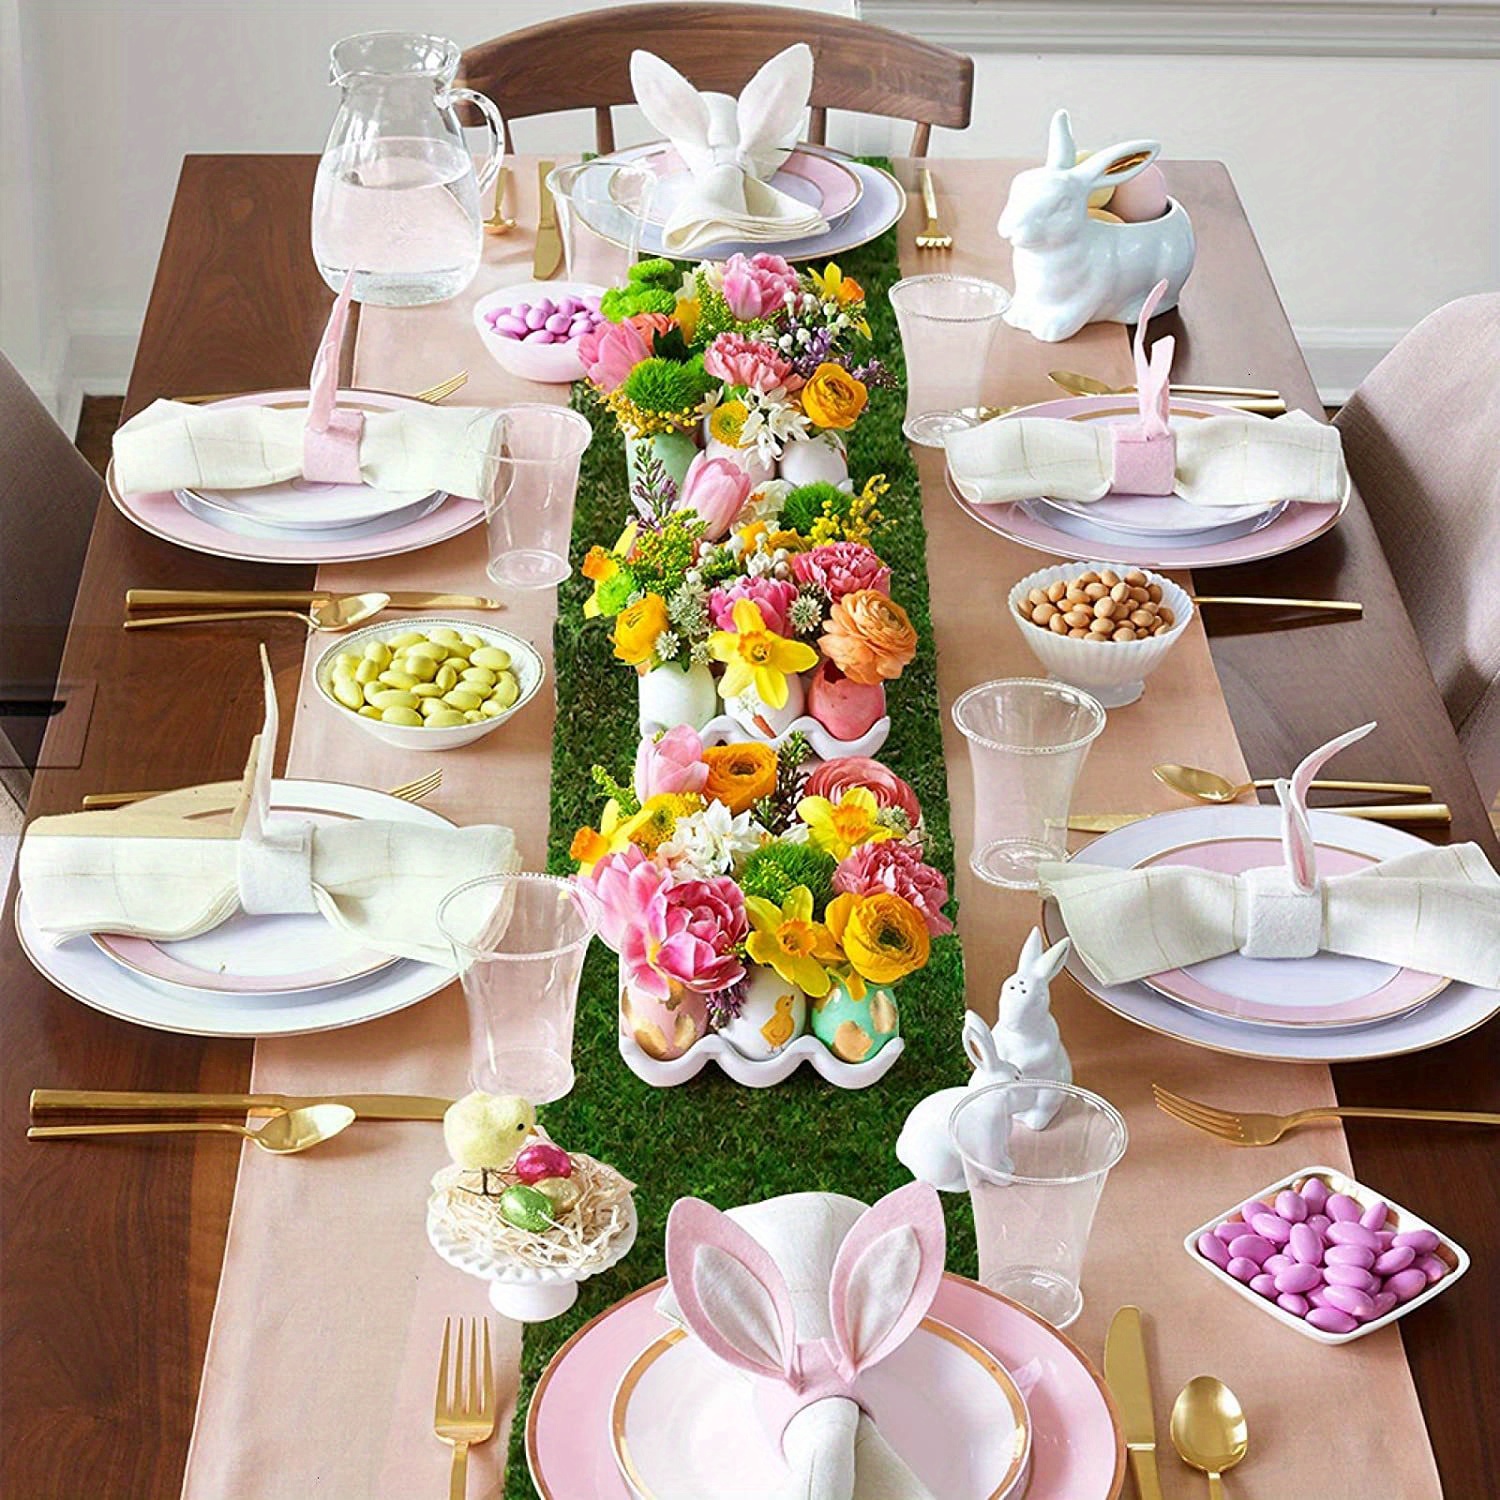 1pc, Dried Moss Table Runner 30.48x 180.34 Cm For Party Garden